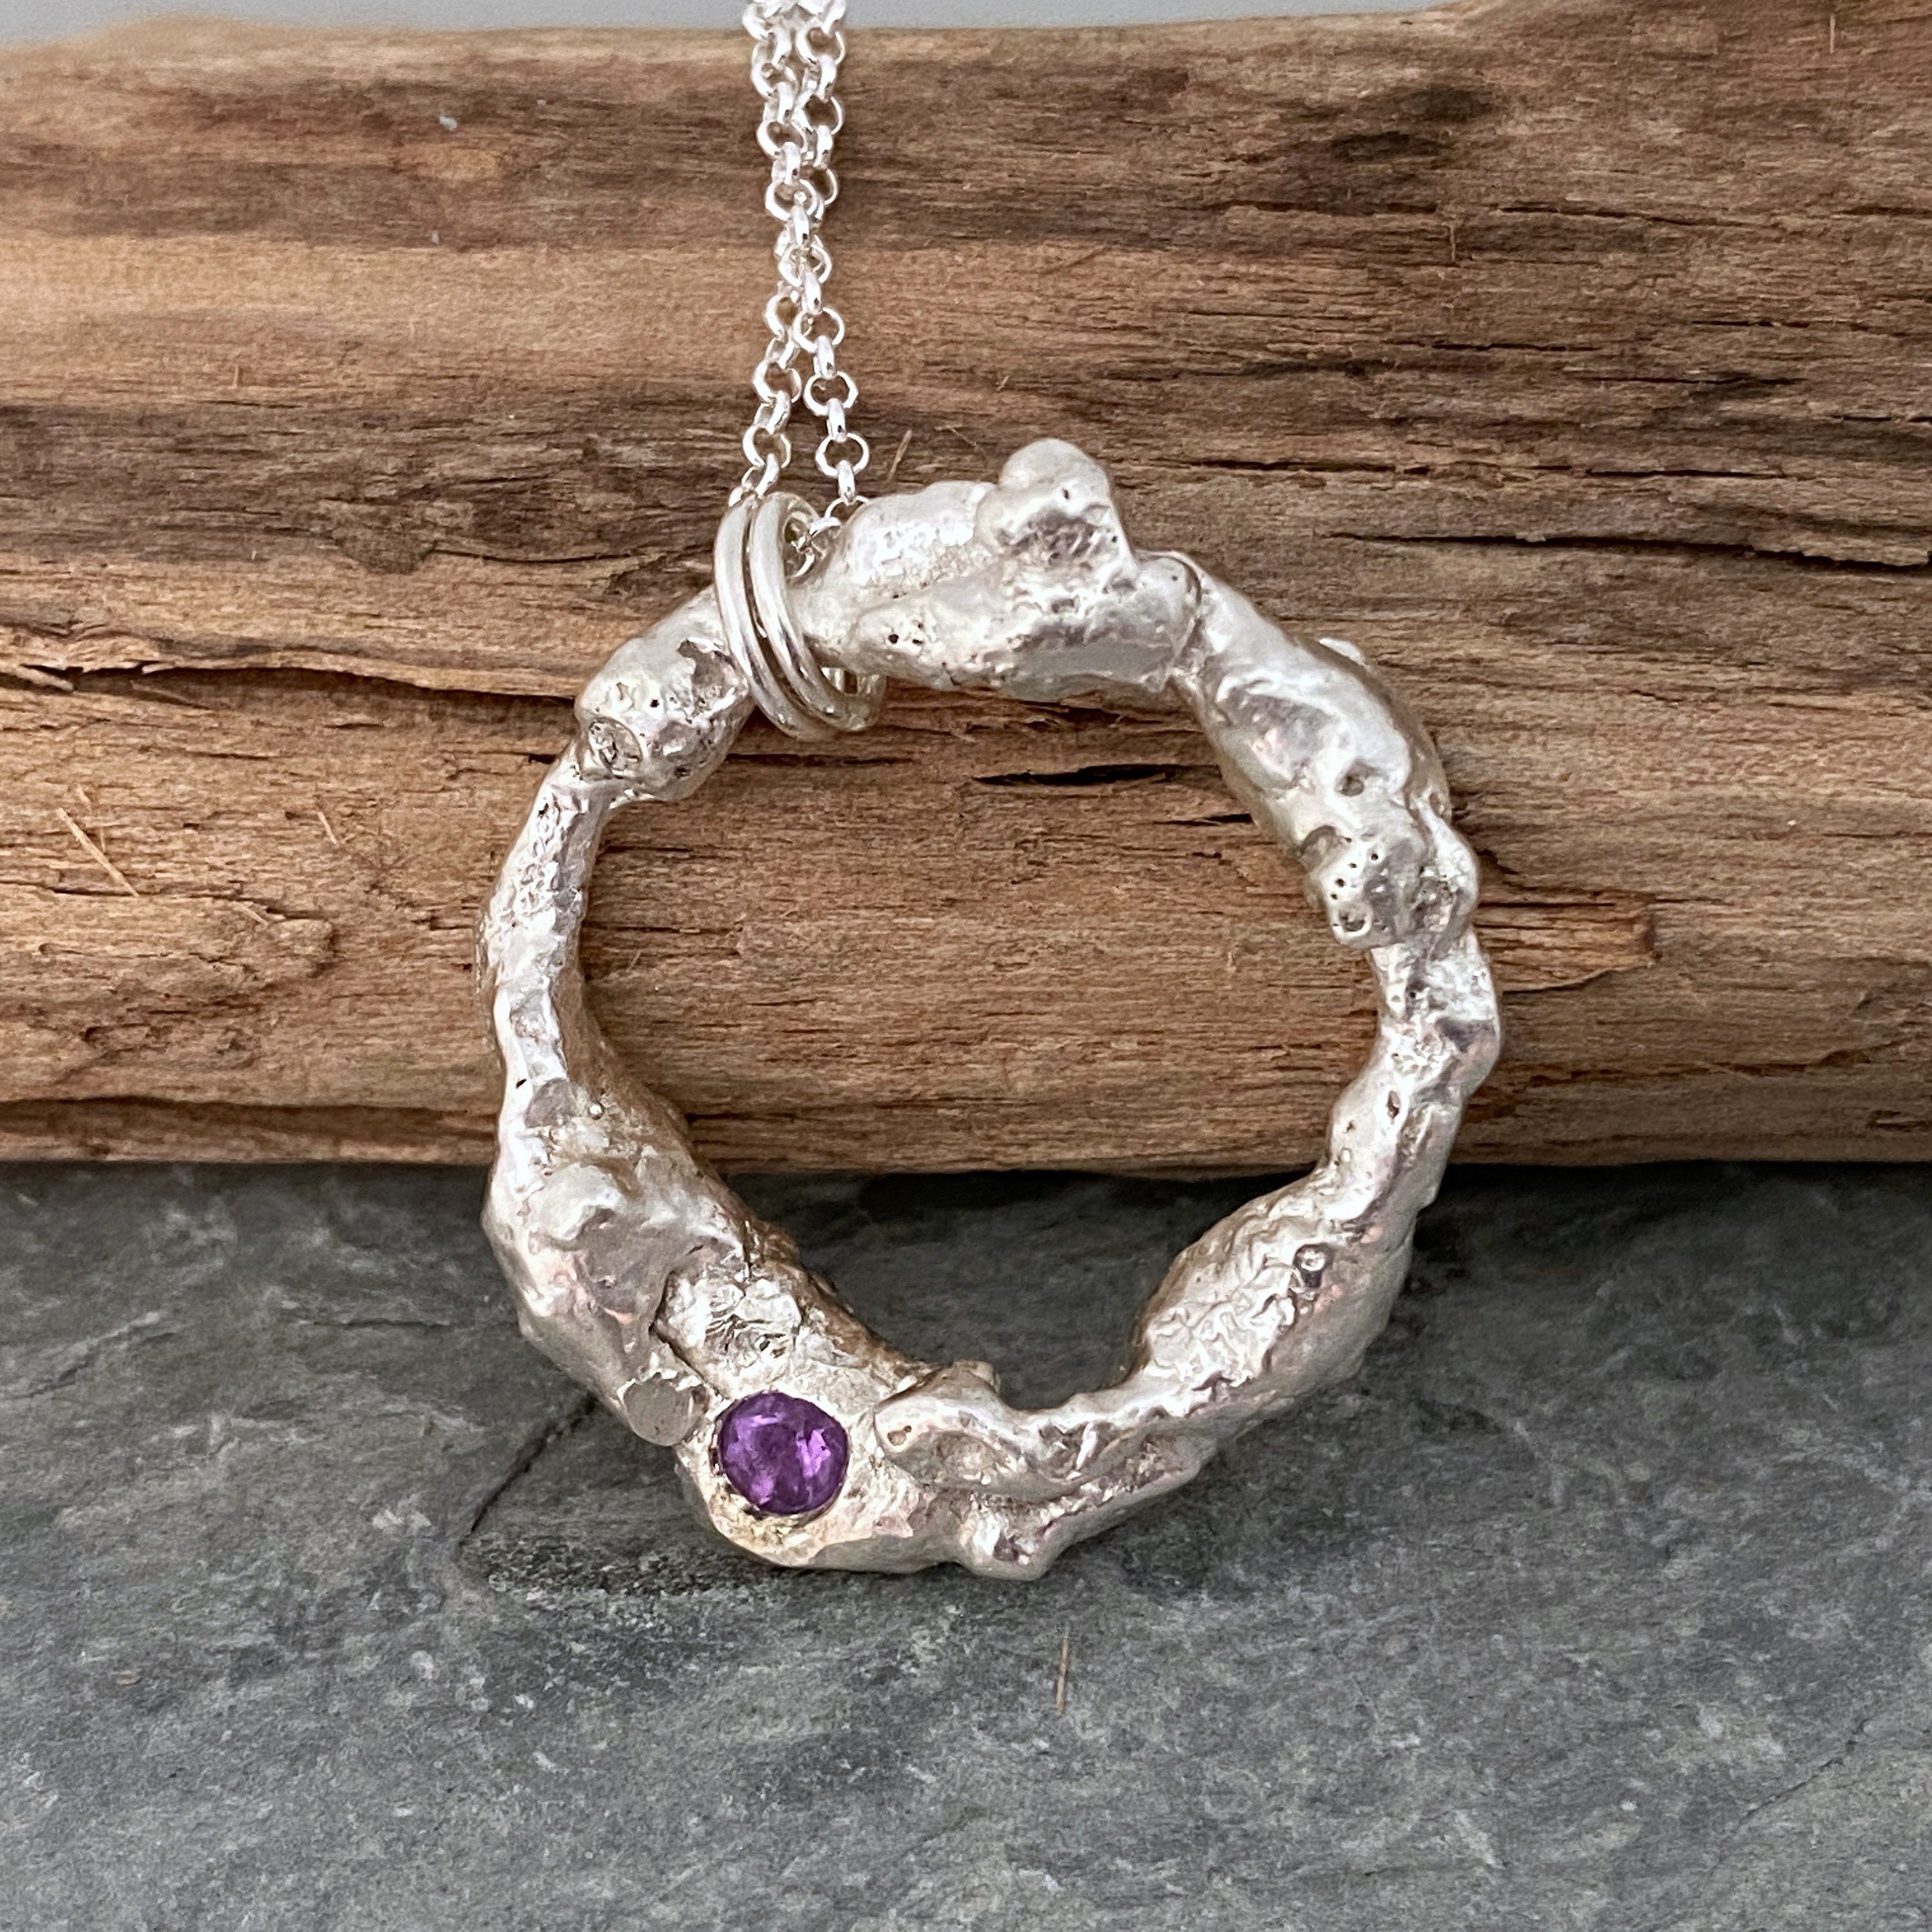 Molten Silver Necklace, Organic Ring Pendant On A Chain, Recycled Jewellery, Purple Amethyst One Of Kind Necklace